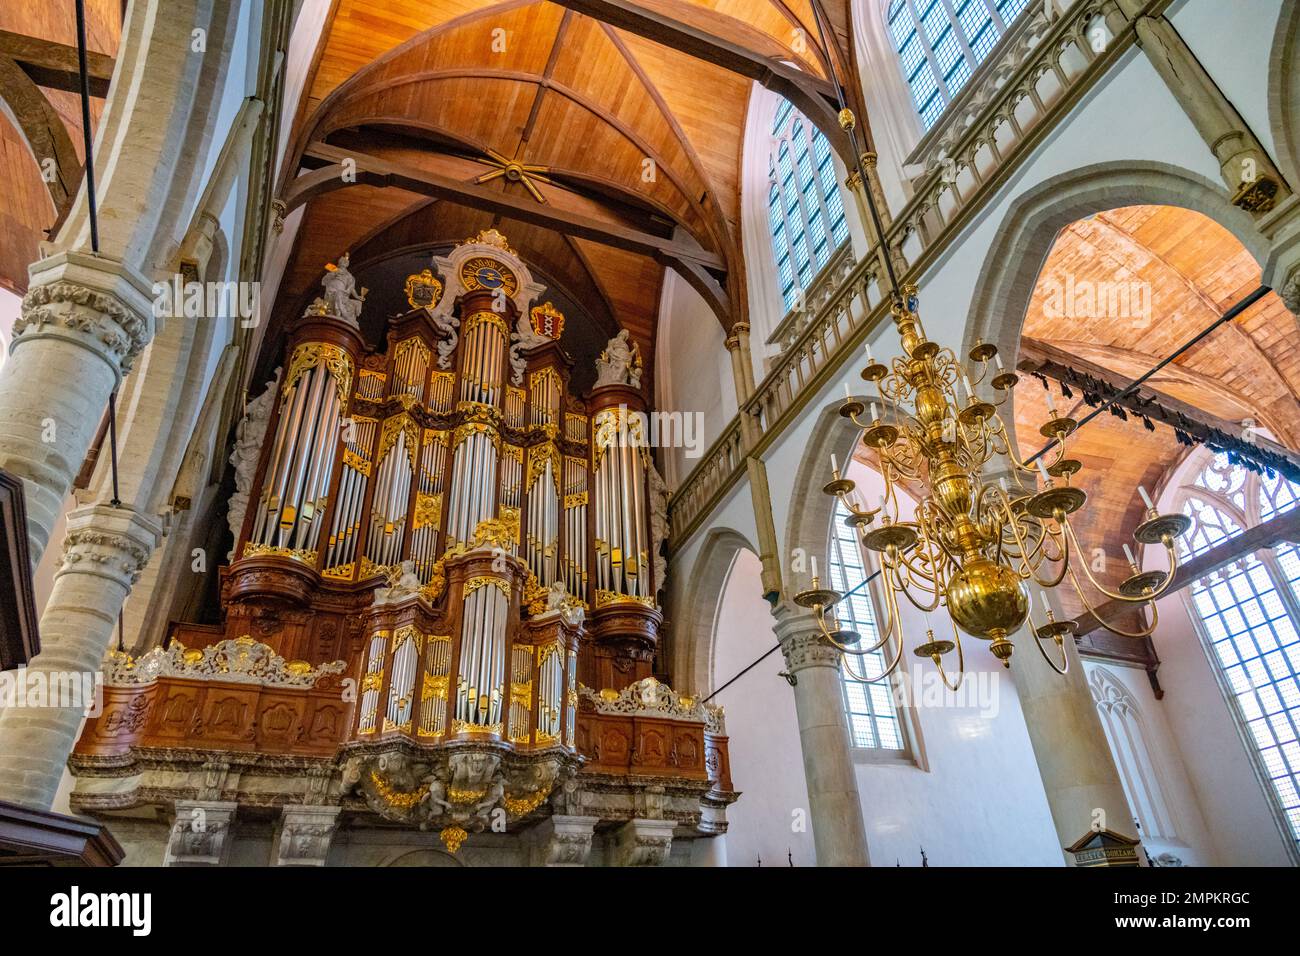 Interiora and great organ of the The Oude Church Amsterdam Netherlands. Stock Photo